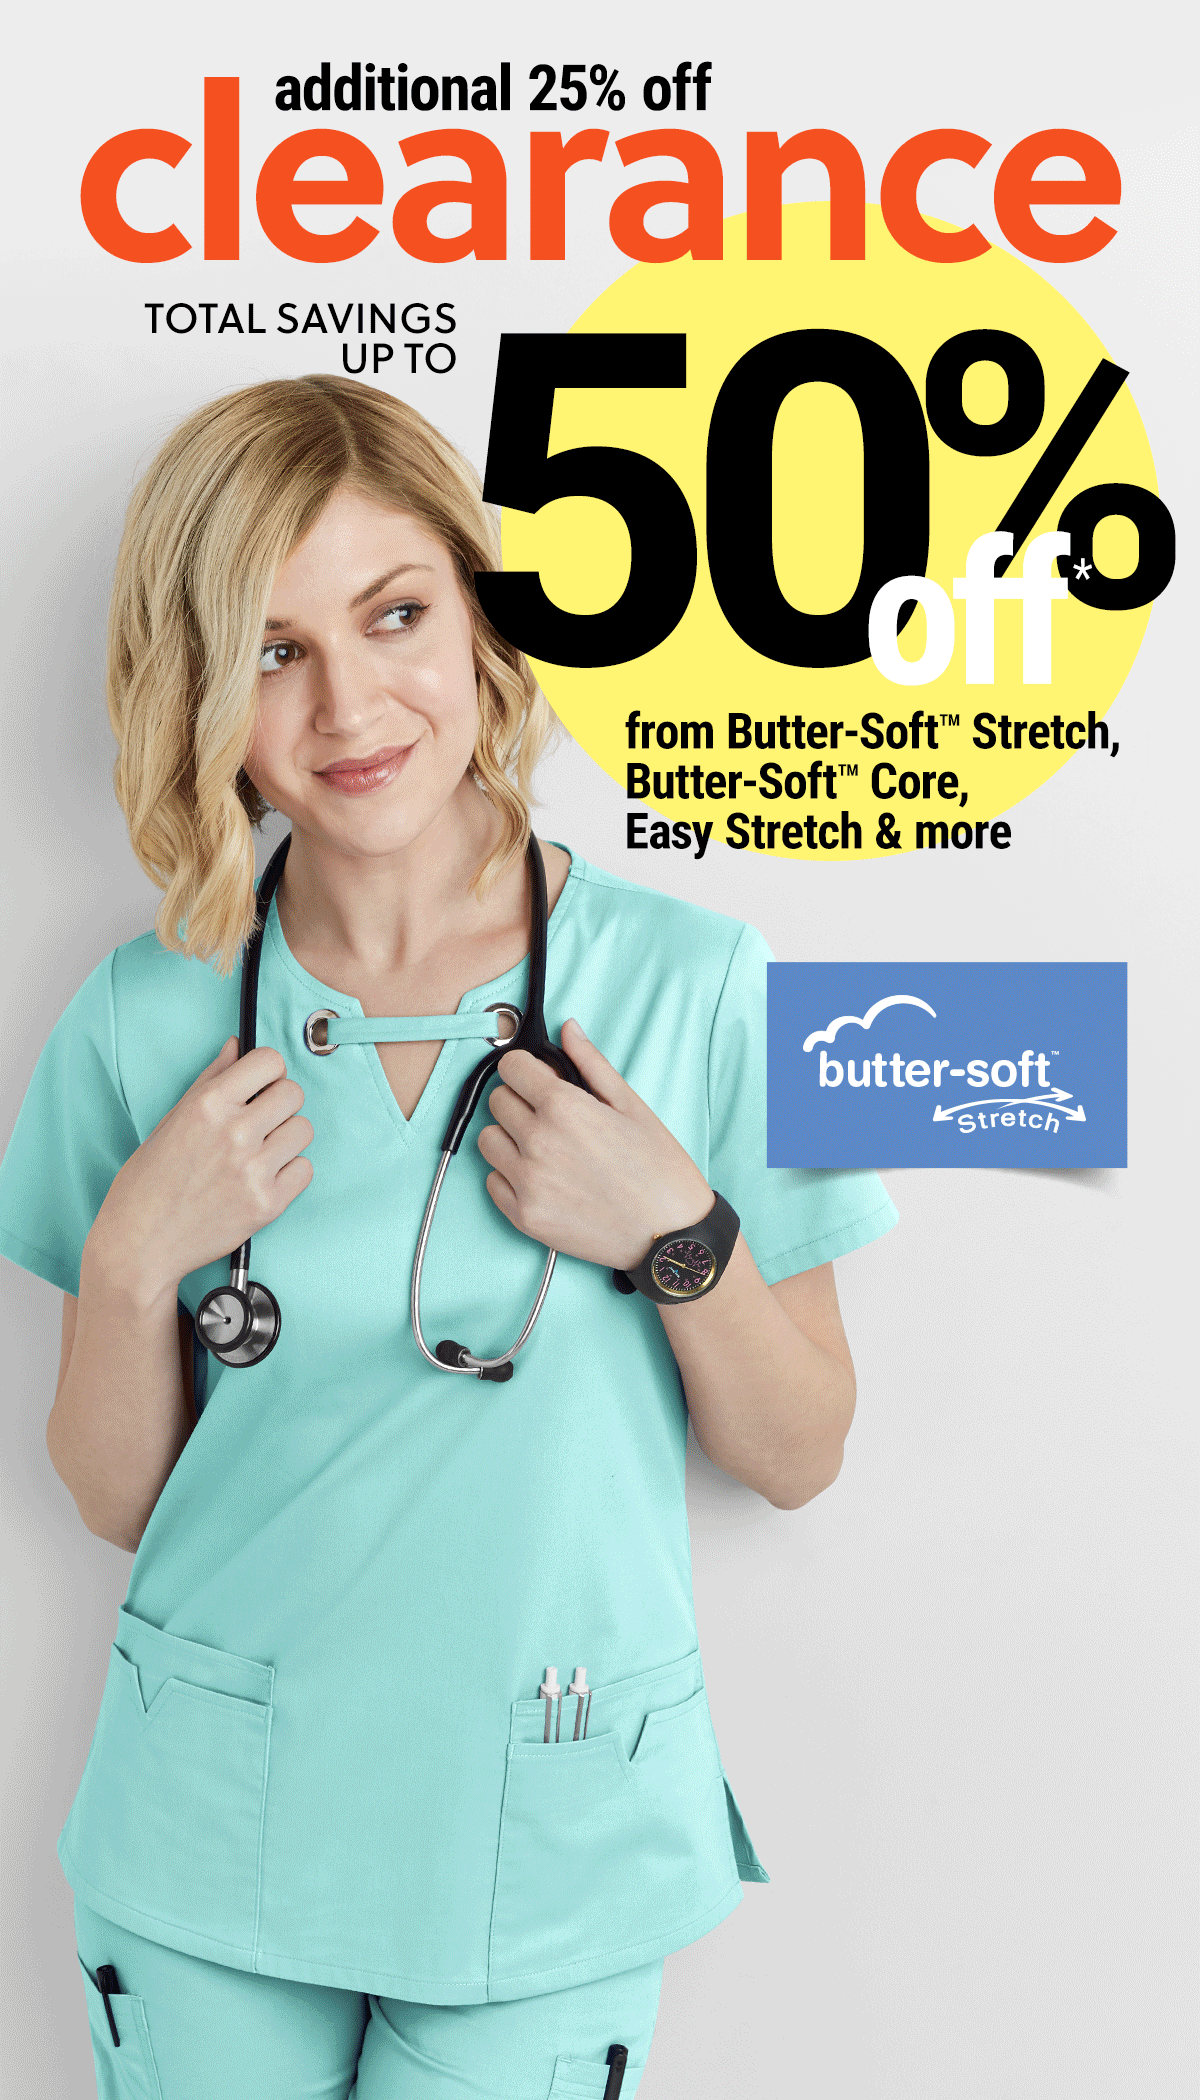 Favorite scrubs? @uniformadvantage! These Easy Stretch, Butter